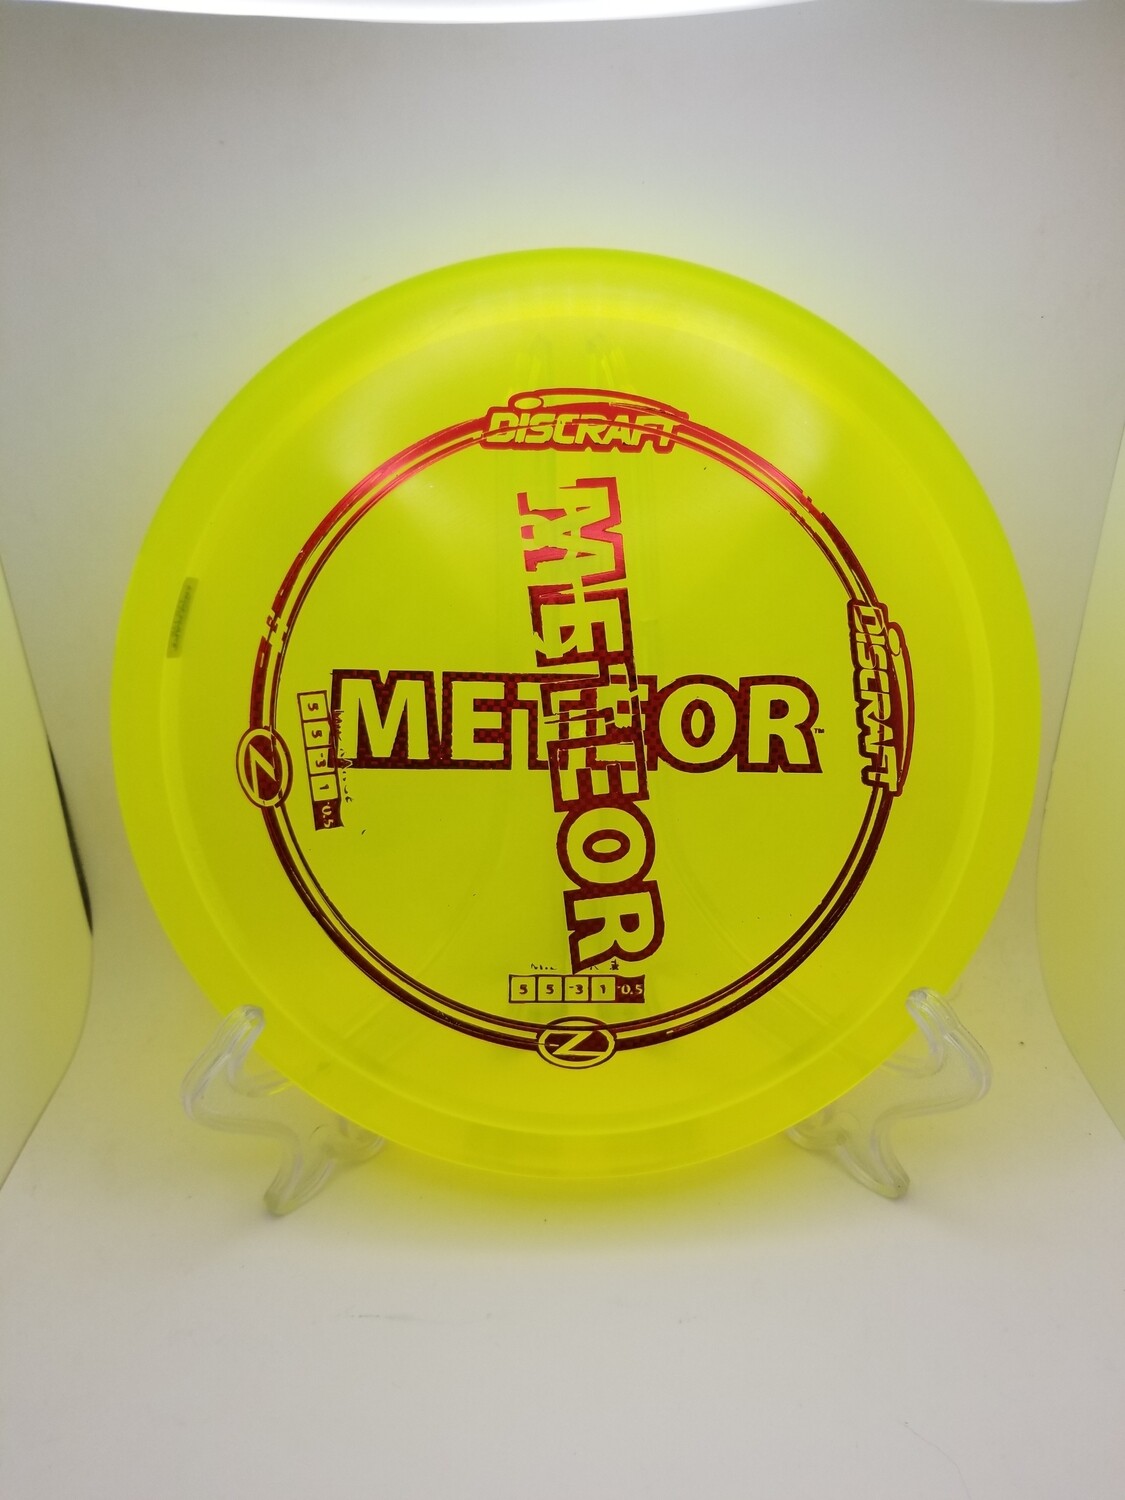 Discraft Discs Z Meteor Misprint Yellow with Red Diamond Plate 175-176g